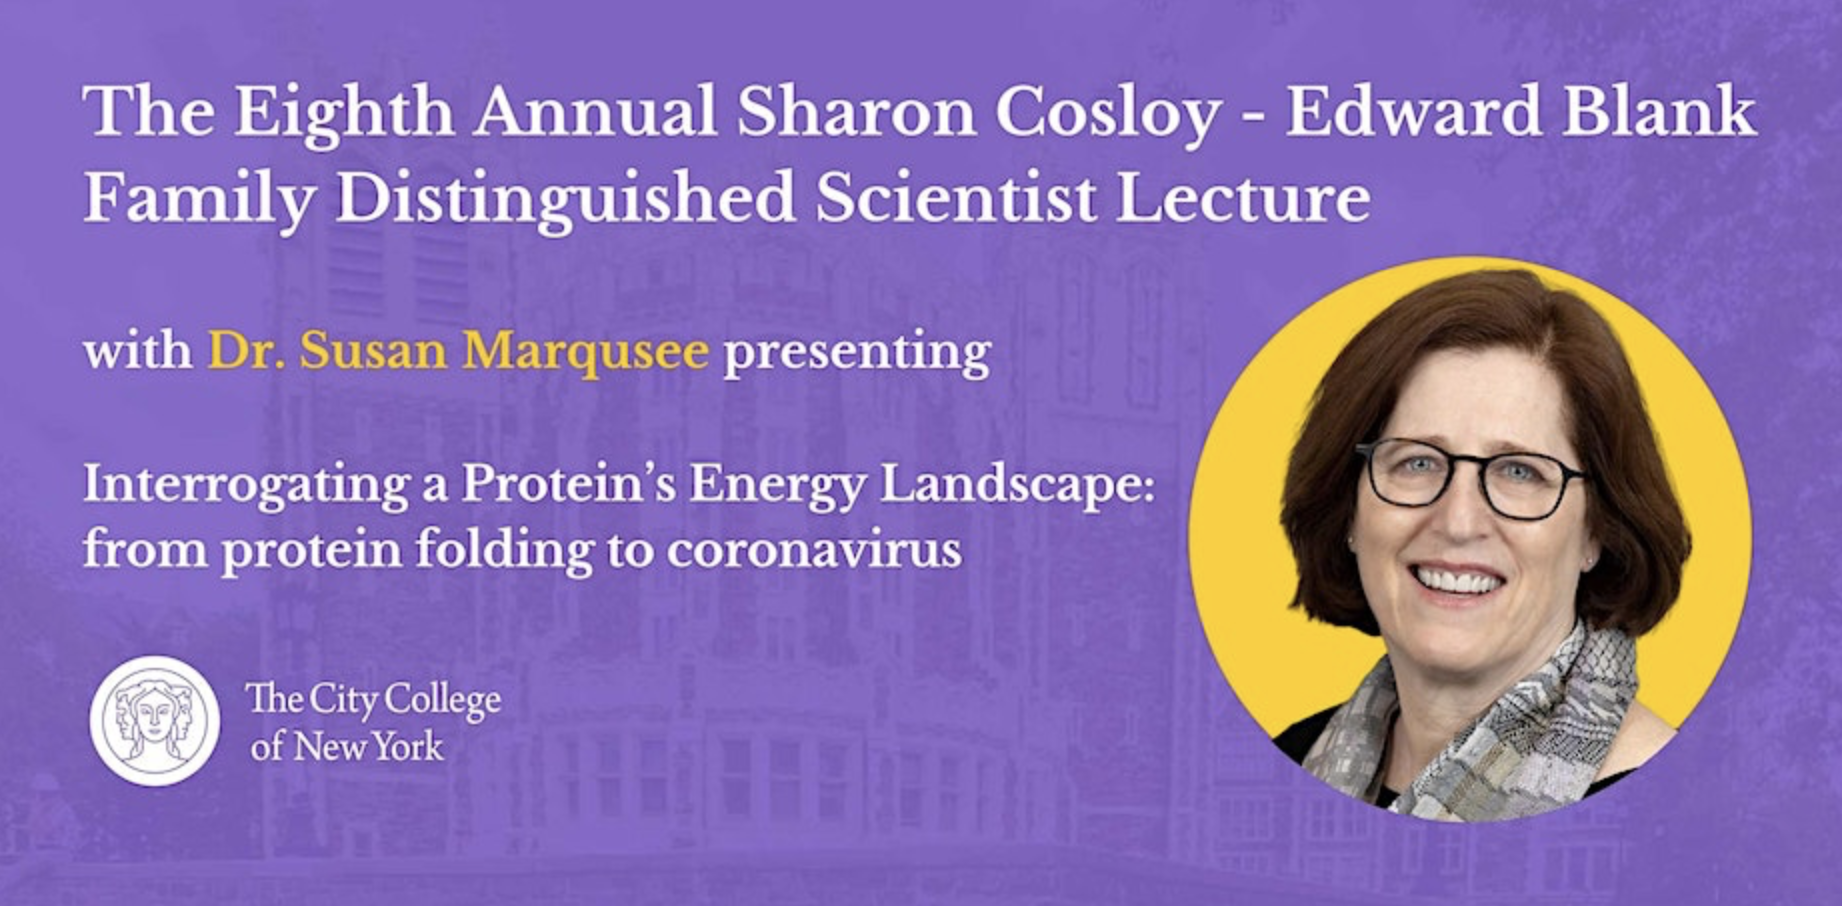 The Sharon Cosloy - Edward Blank Family Distinguished Scientist Lecture The 8th Annual Sharon Cosloy - Edward Blank Family Distinguished Scientist Lecture with Dr. Susan Marqusee